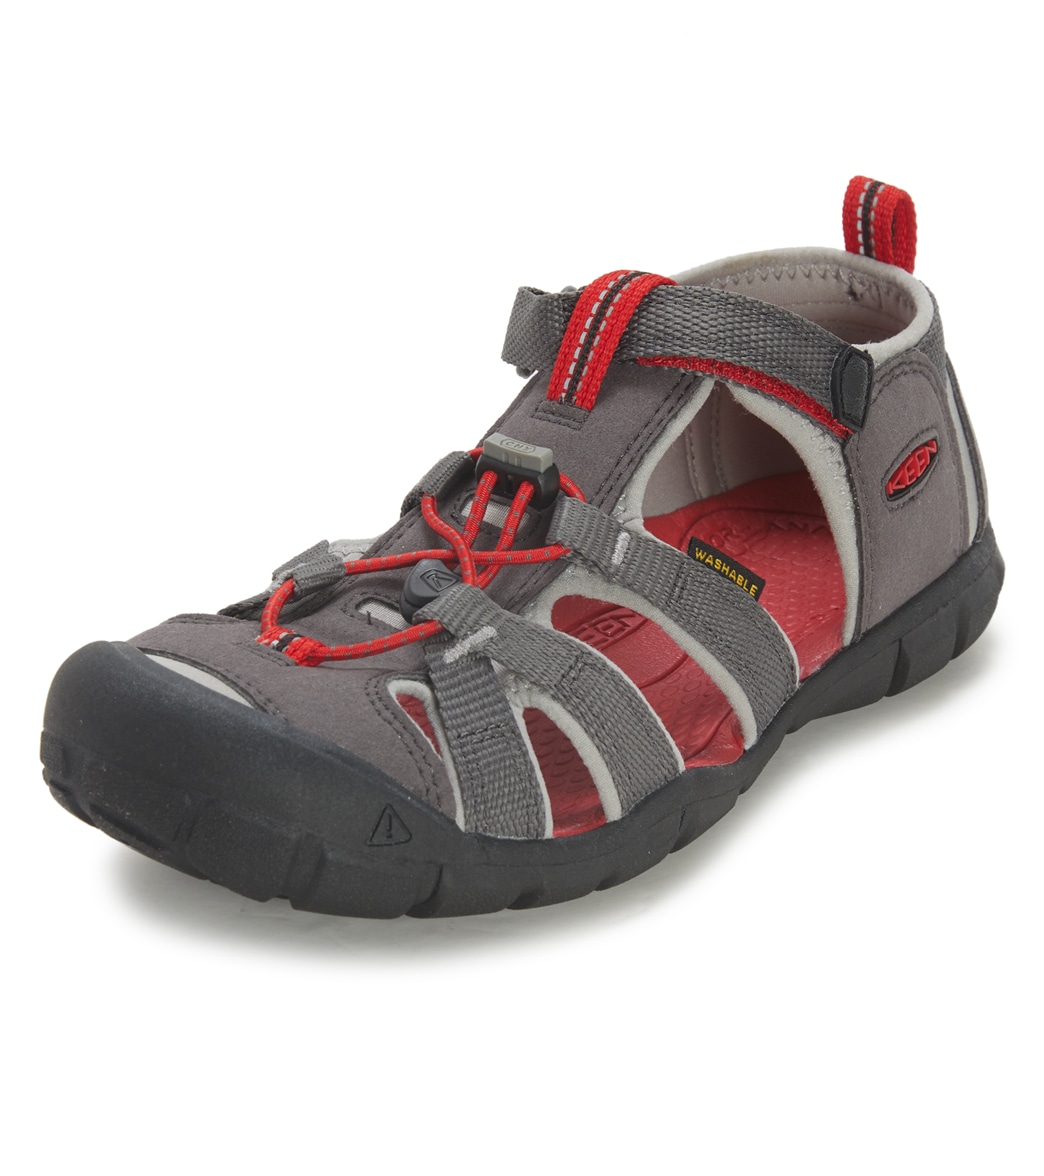 Keen Kids' Seacamp Ii Cnx Water Shoes Toddler/Little/Big Kid - Magnet/Drizzle 1 Big - Swimoutlet.com